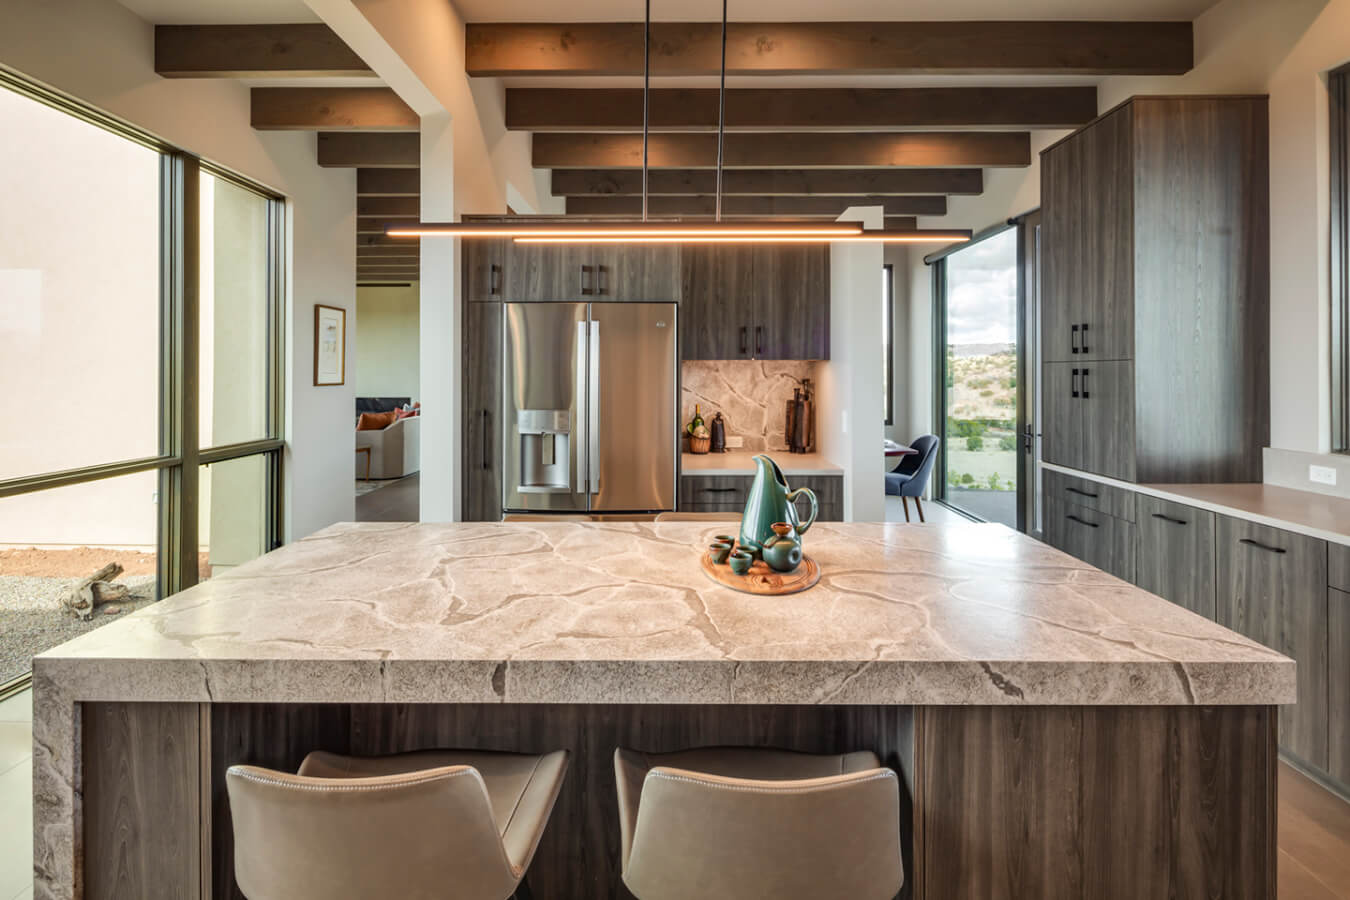 Keywords used: home builder, contractor

Description: A contemporary kitchen with a marble counter top designed and built by a skilled home builder and contractor.